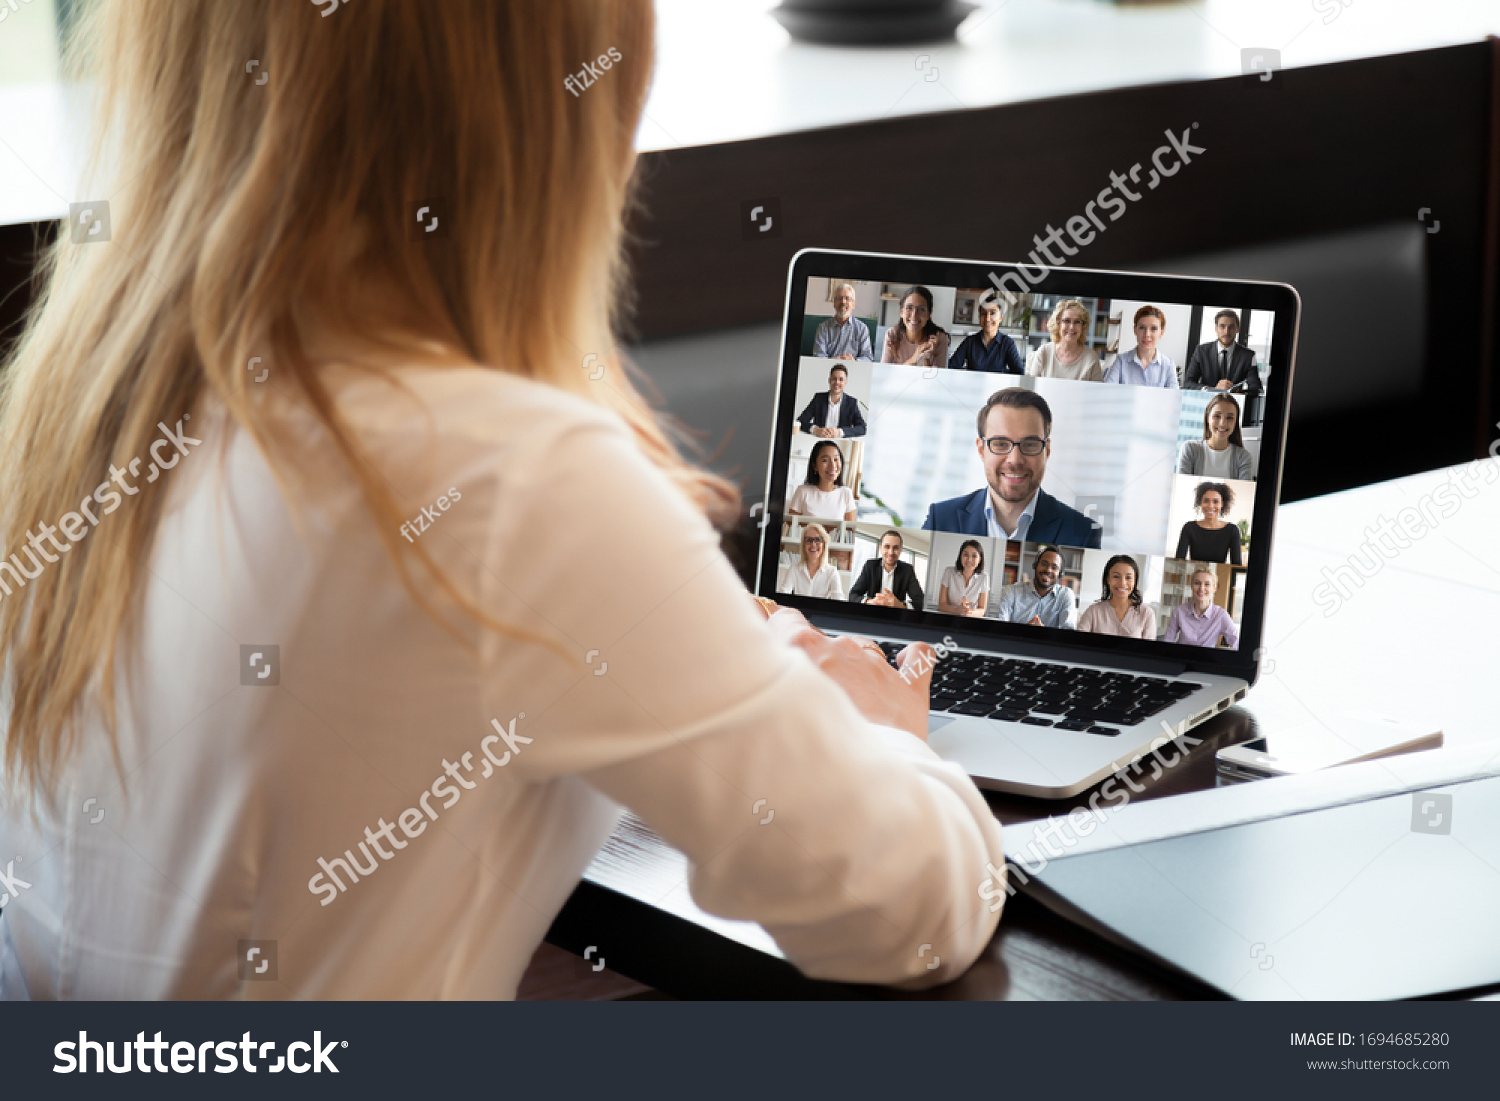 Pc screen view over woman shoulder at group video call. Visual communication between engaged diverse people distantly using webcam and laptop internet connection app. International remote chat concept #1694685280